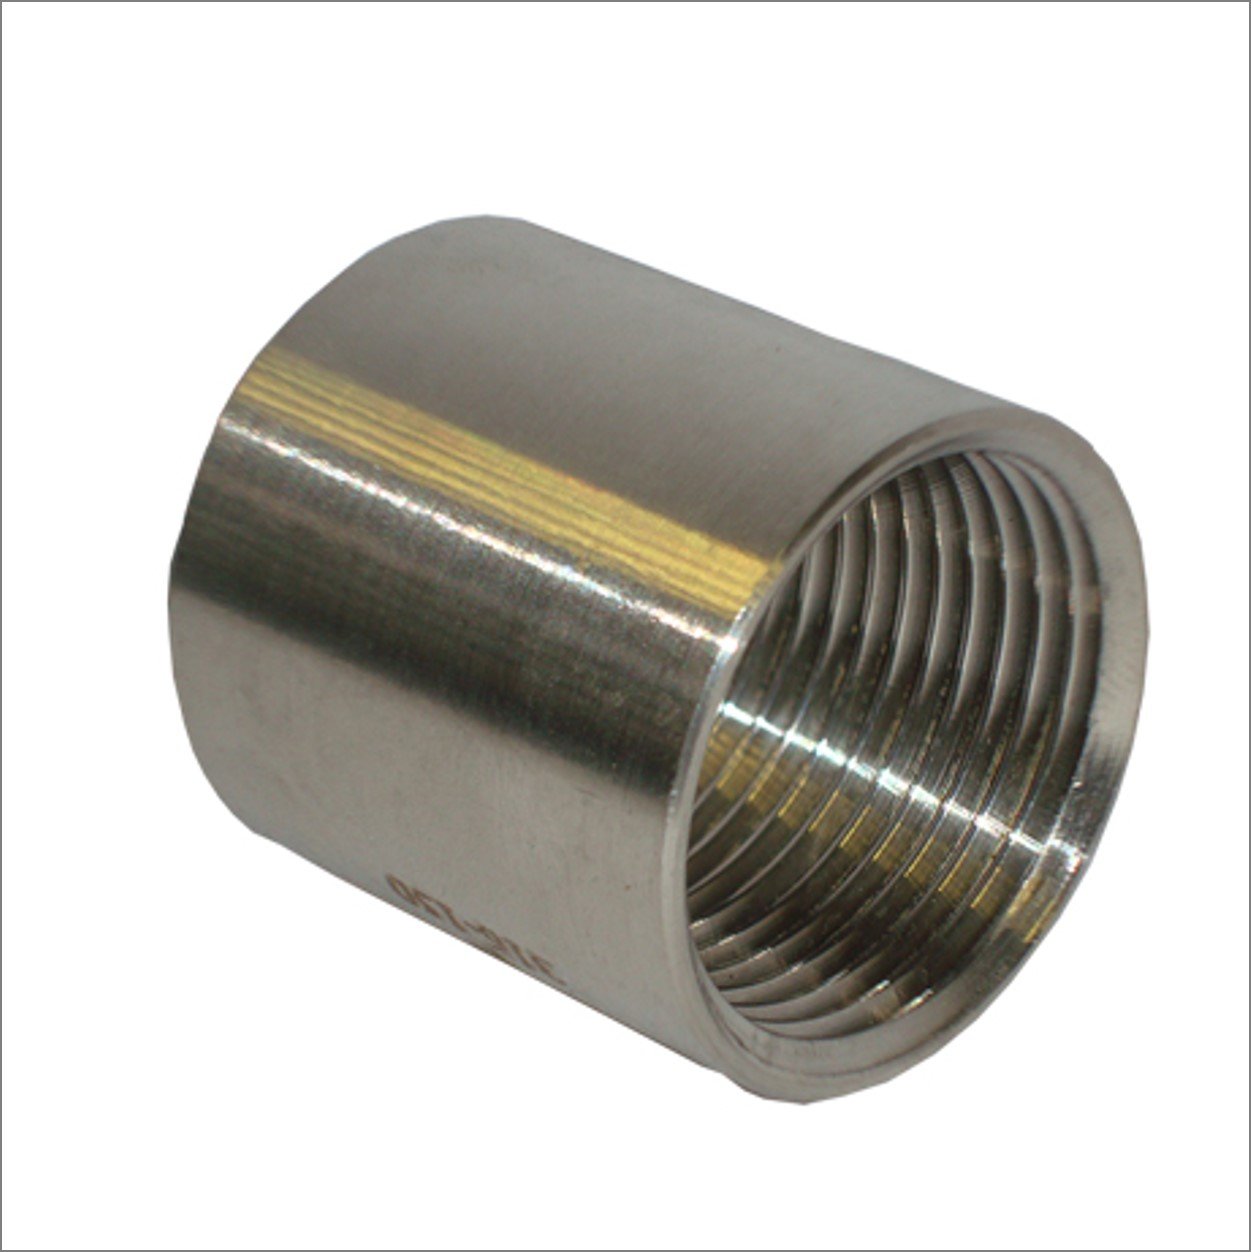 Stainless Steel 316 Socket Pipe Fitting 150lb BSP Imperial 1/8" to 4" Sizes 